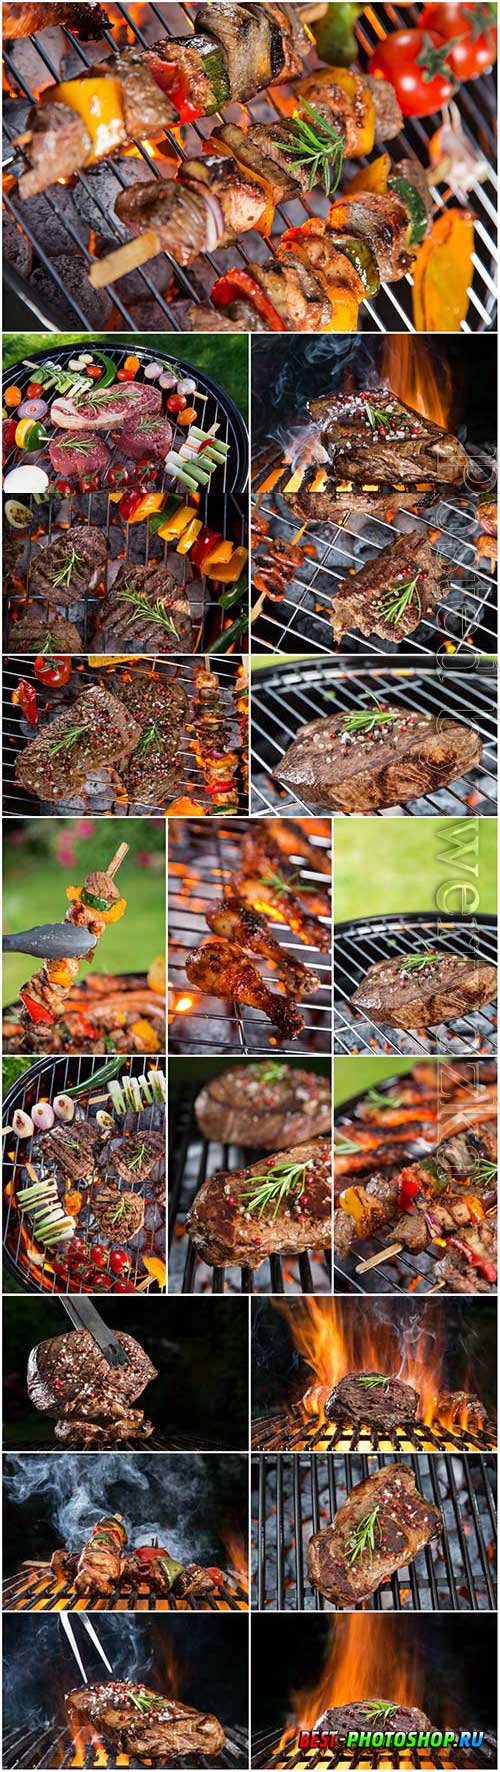 Grilled meat and vegetables stock photo